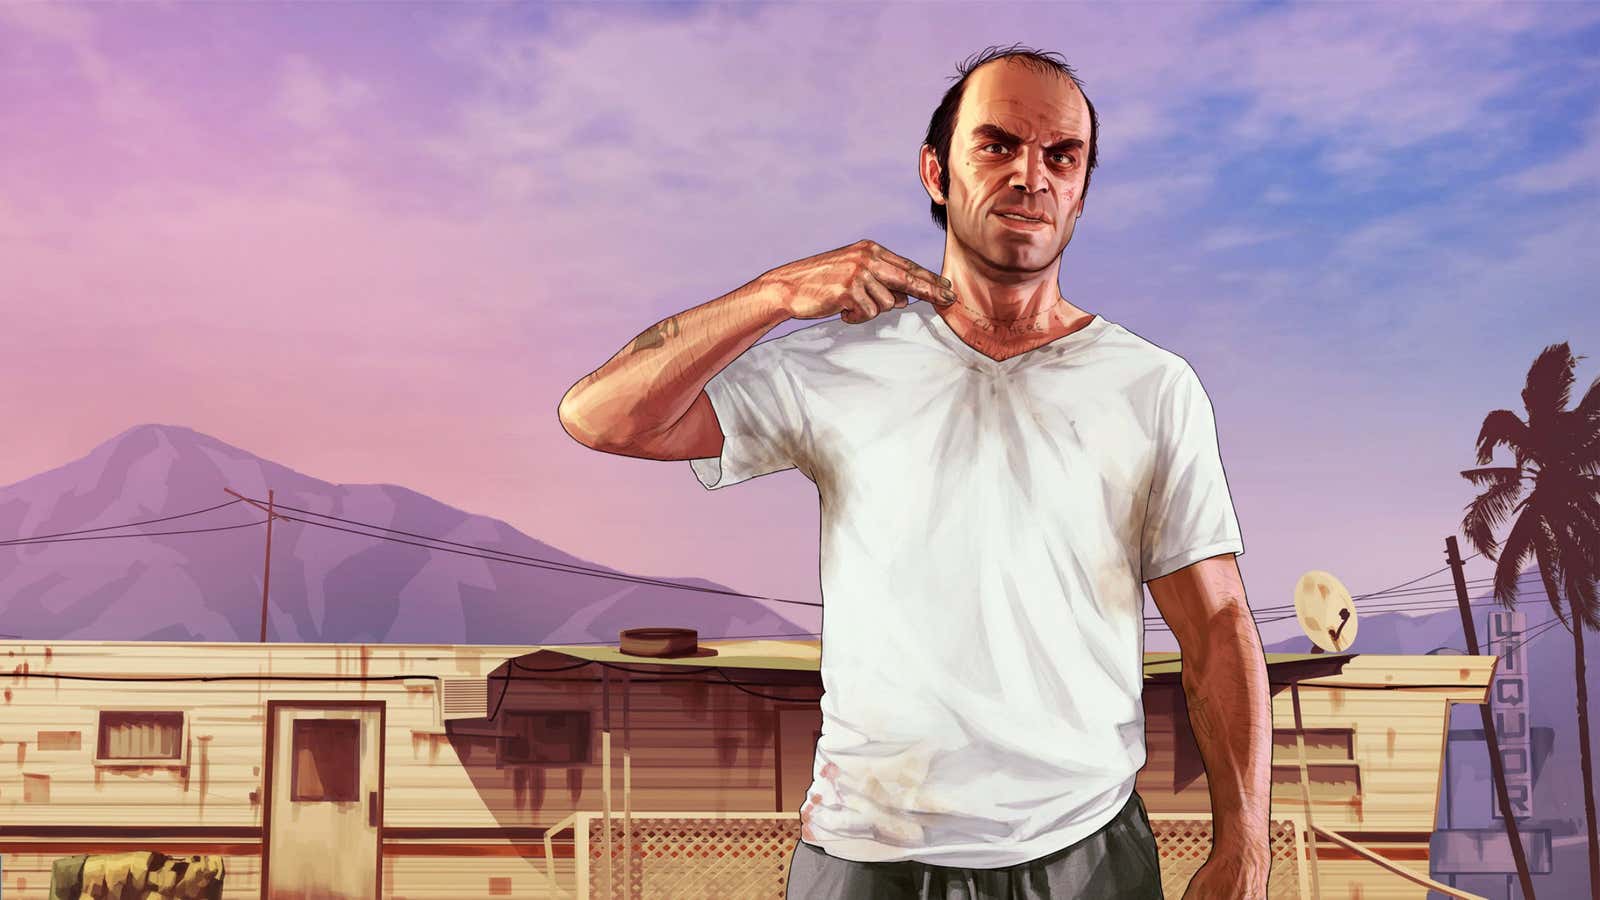 GTA’s Trevor foresees a grim fate for the industry if it doesn’t adapt.